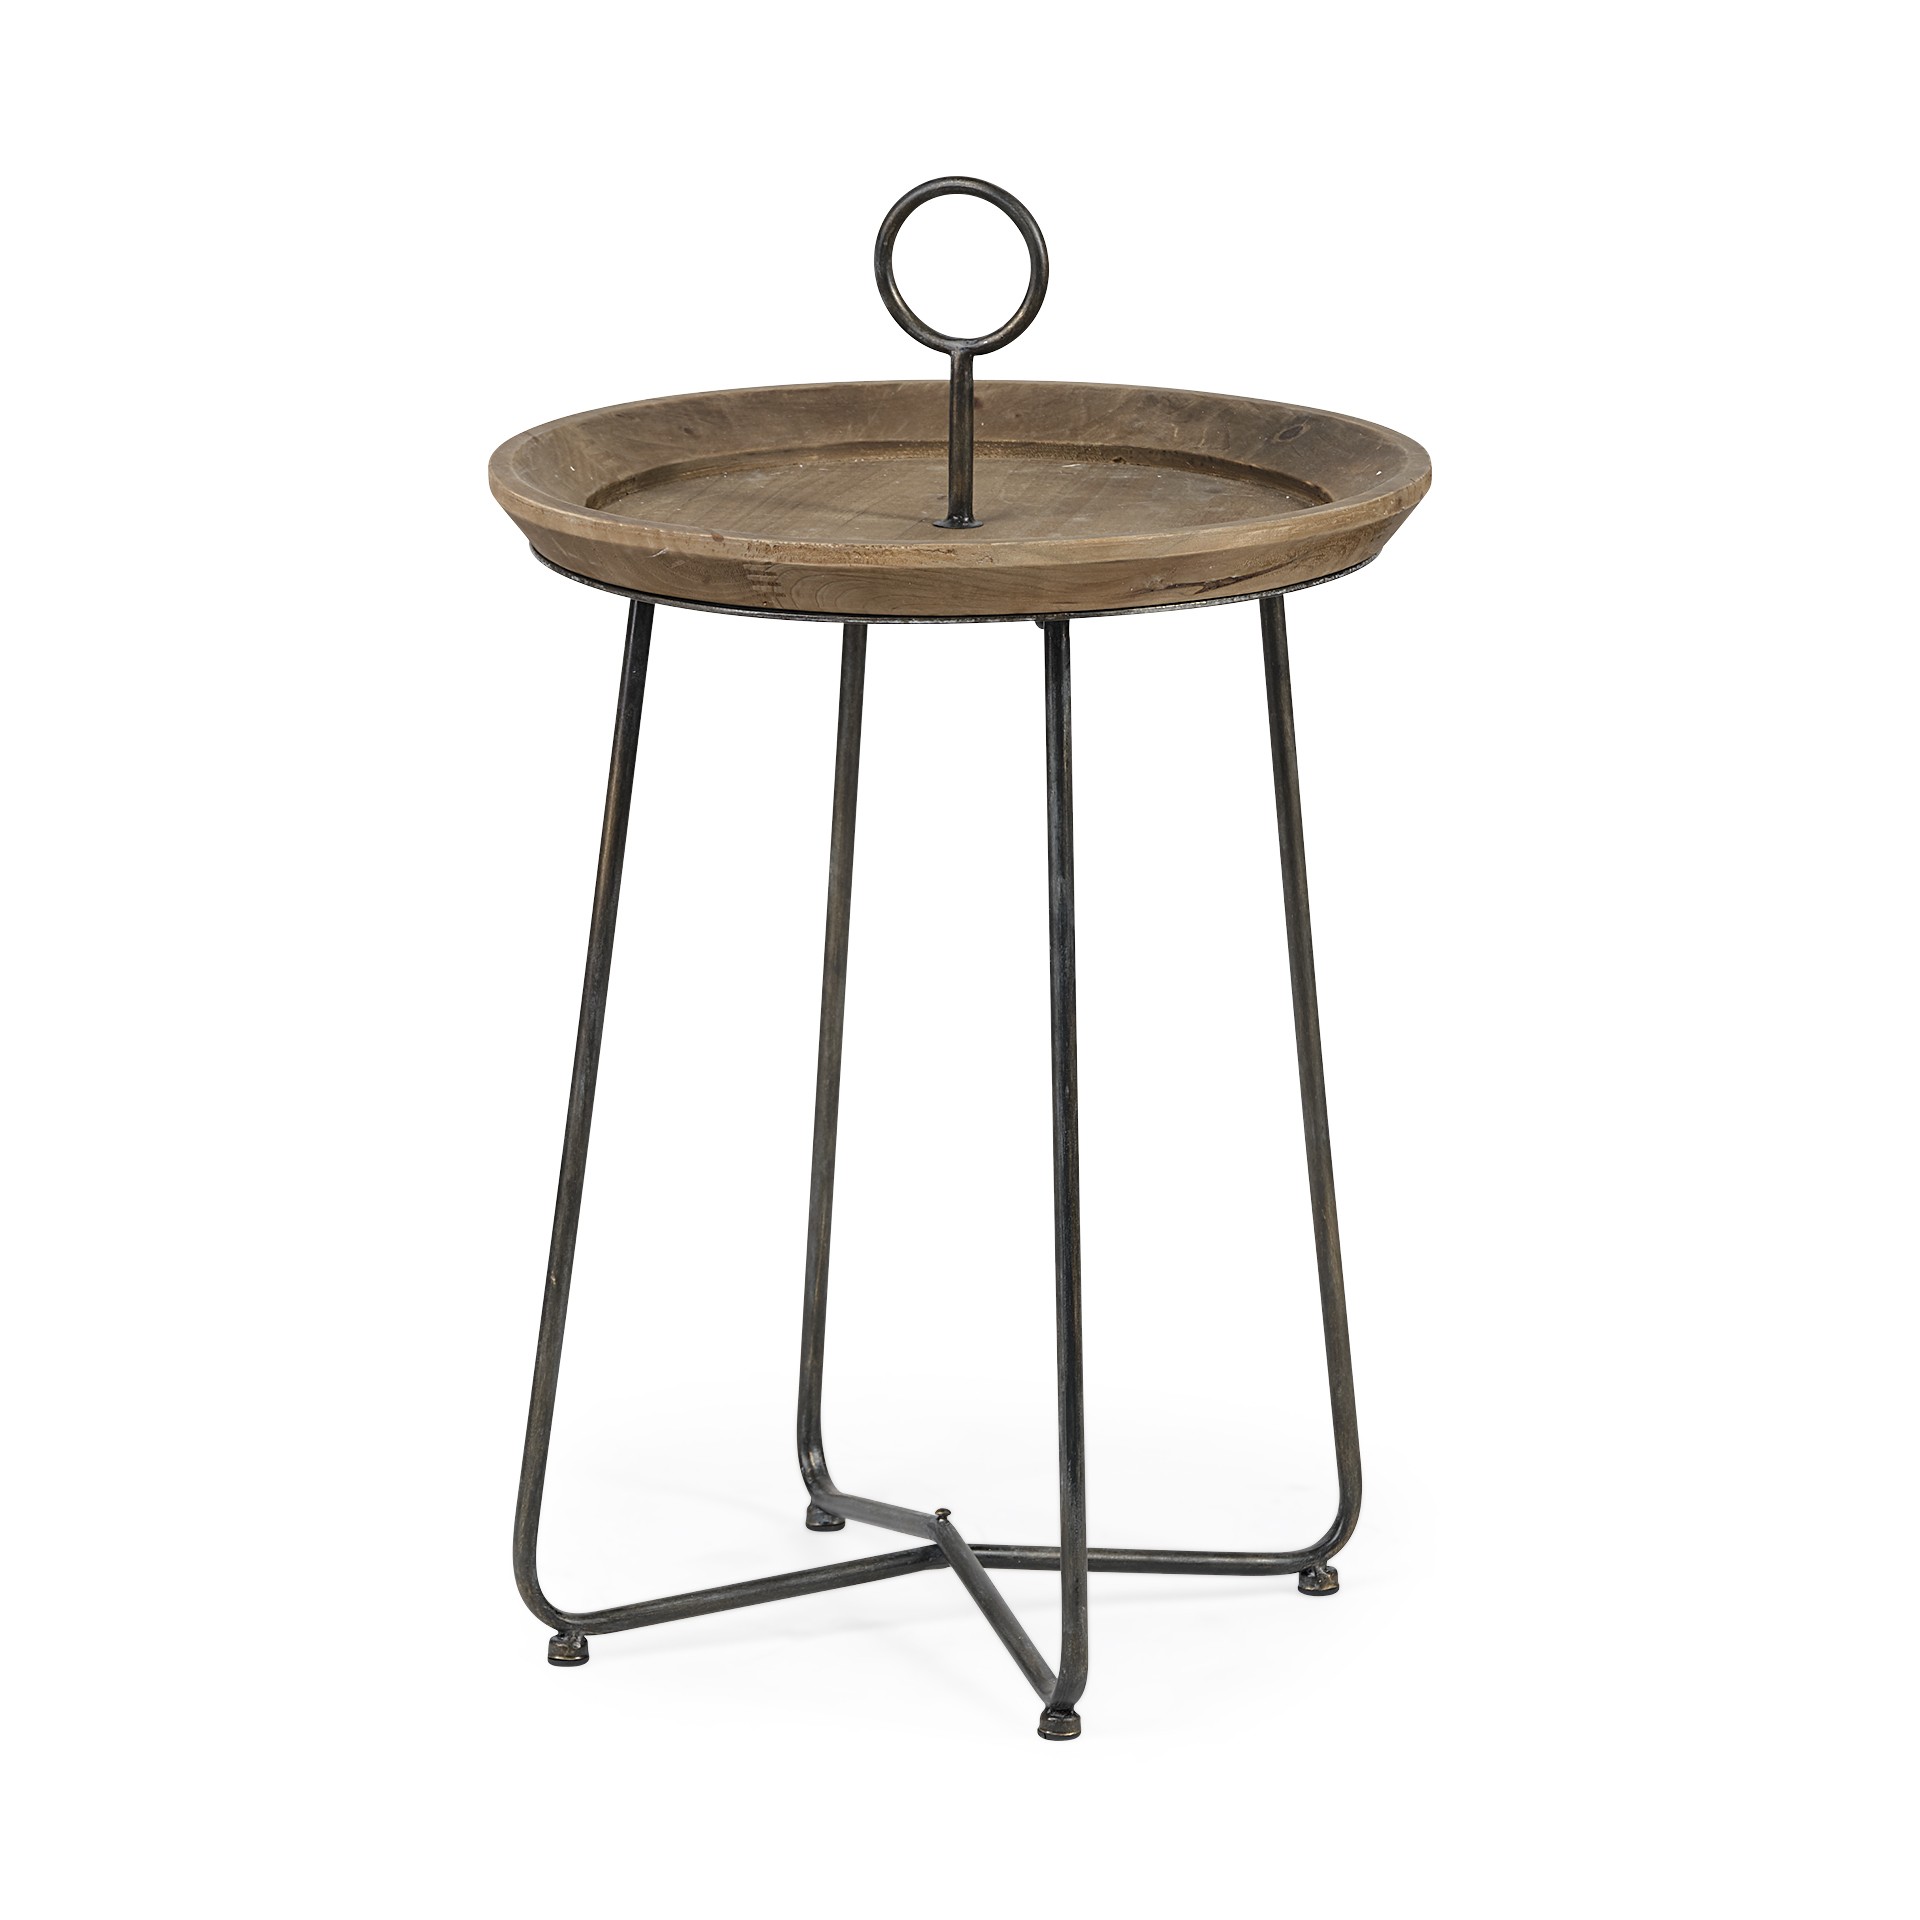 Brown Wood Round Top Accent Table with Black Metal Frame